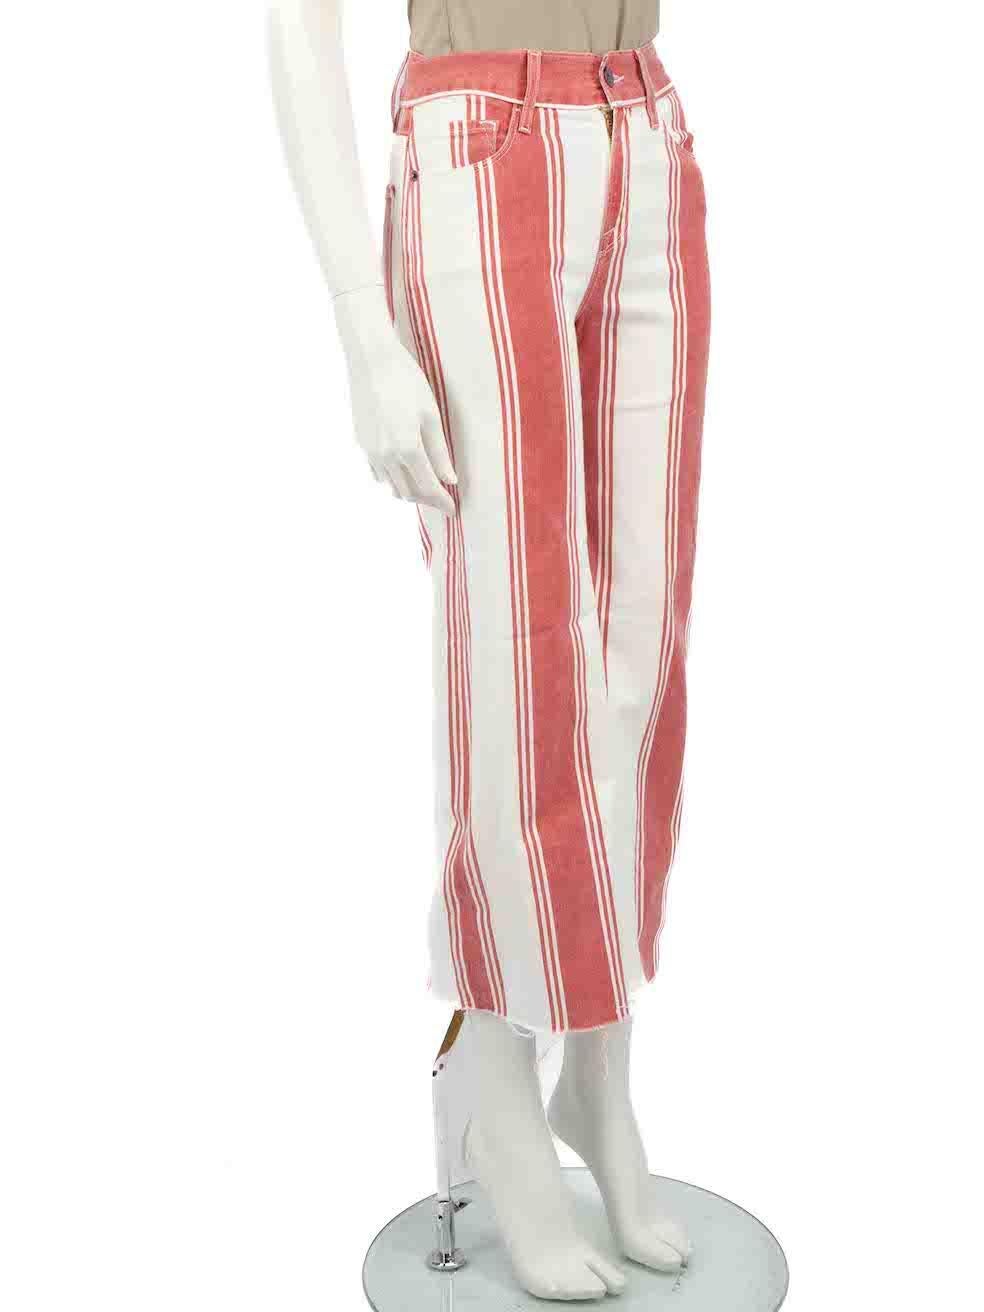 CONDITION is Very good. Hardly any visible wear to jeans is evident on this used FRAME designer resale item.

Details
Fiery Stripe
Multicolour - white and red
Cotton
Jeans
Striped pattern
Wide leg
Cropped
Raw hem
3x Front pockets
2x Back pockets
Fly